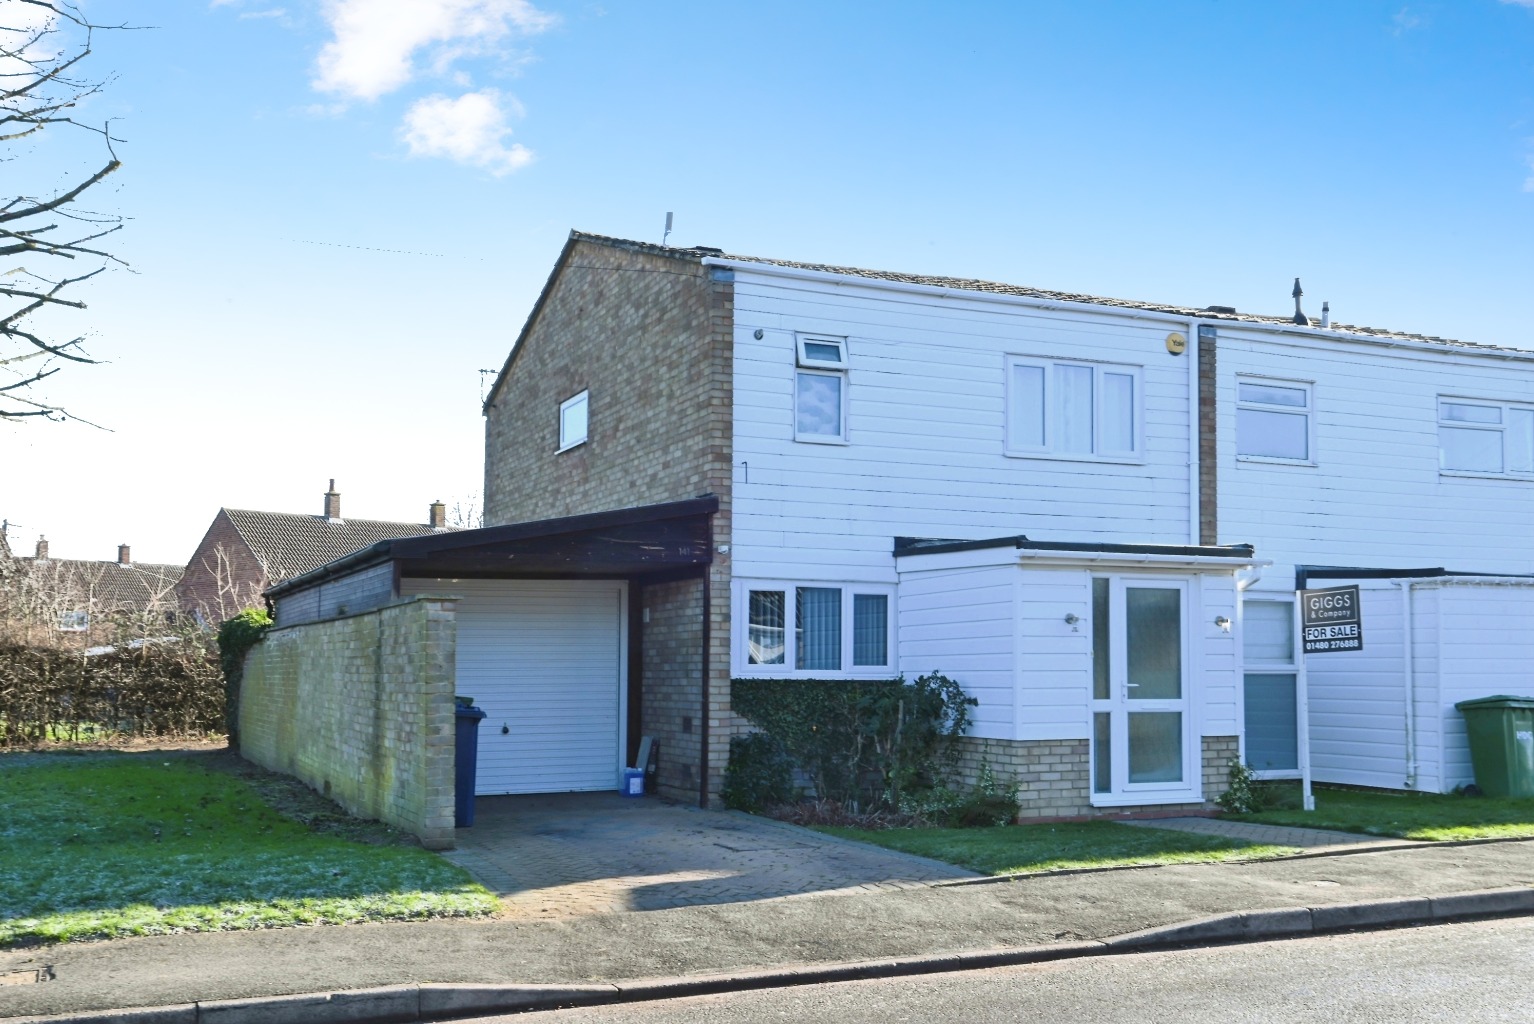 3 bed semi-detached house for sale in Gordon Road, St. Neots - Property Image 1